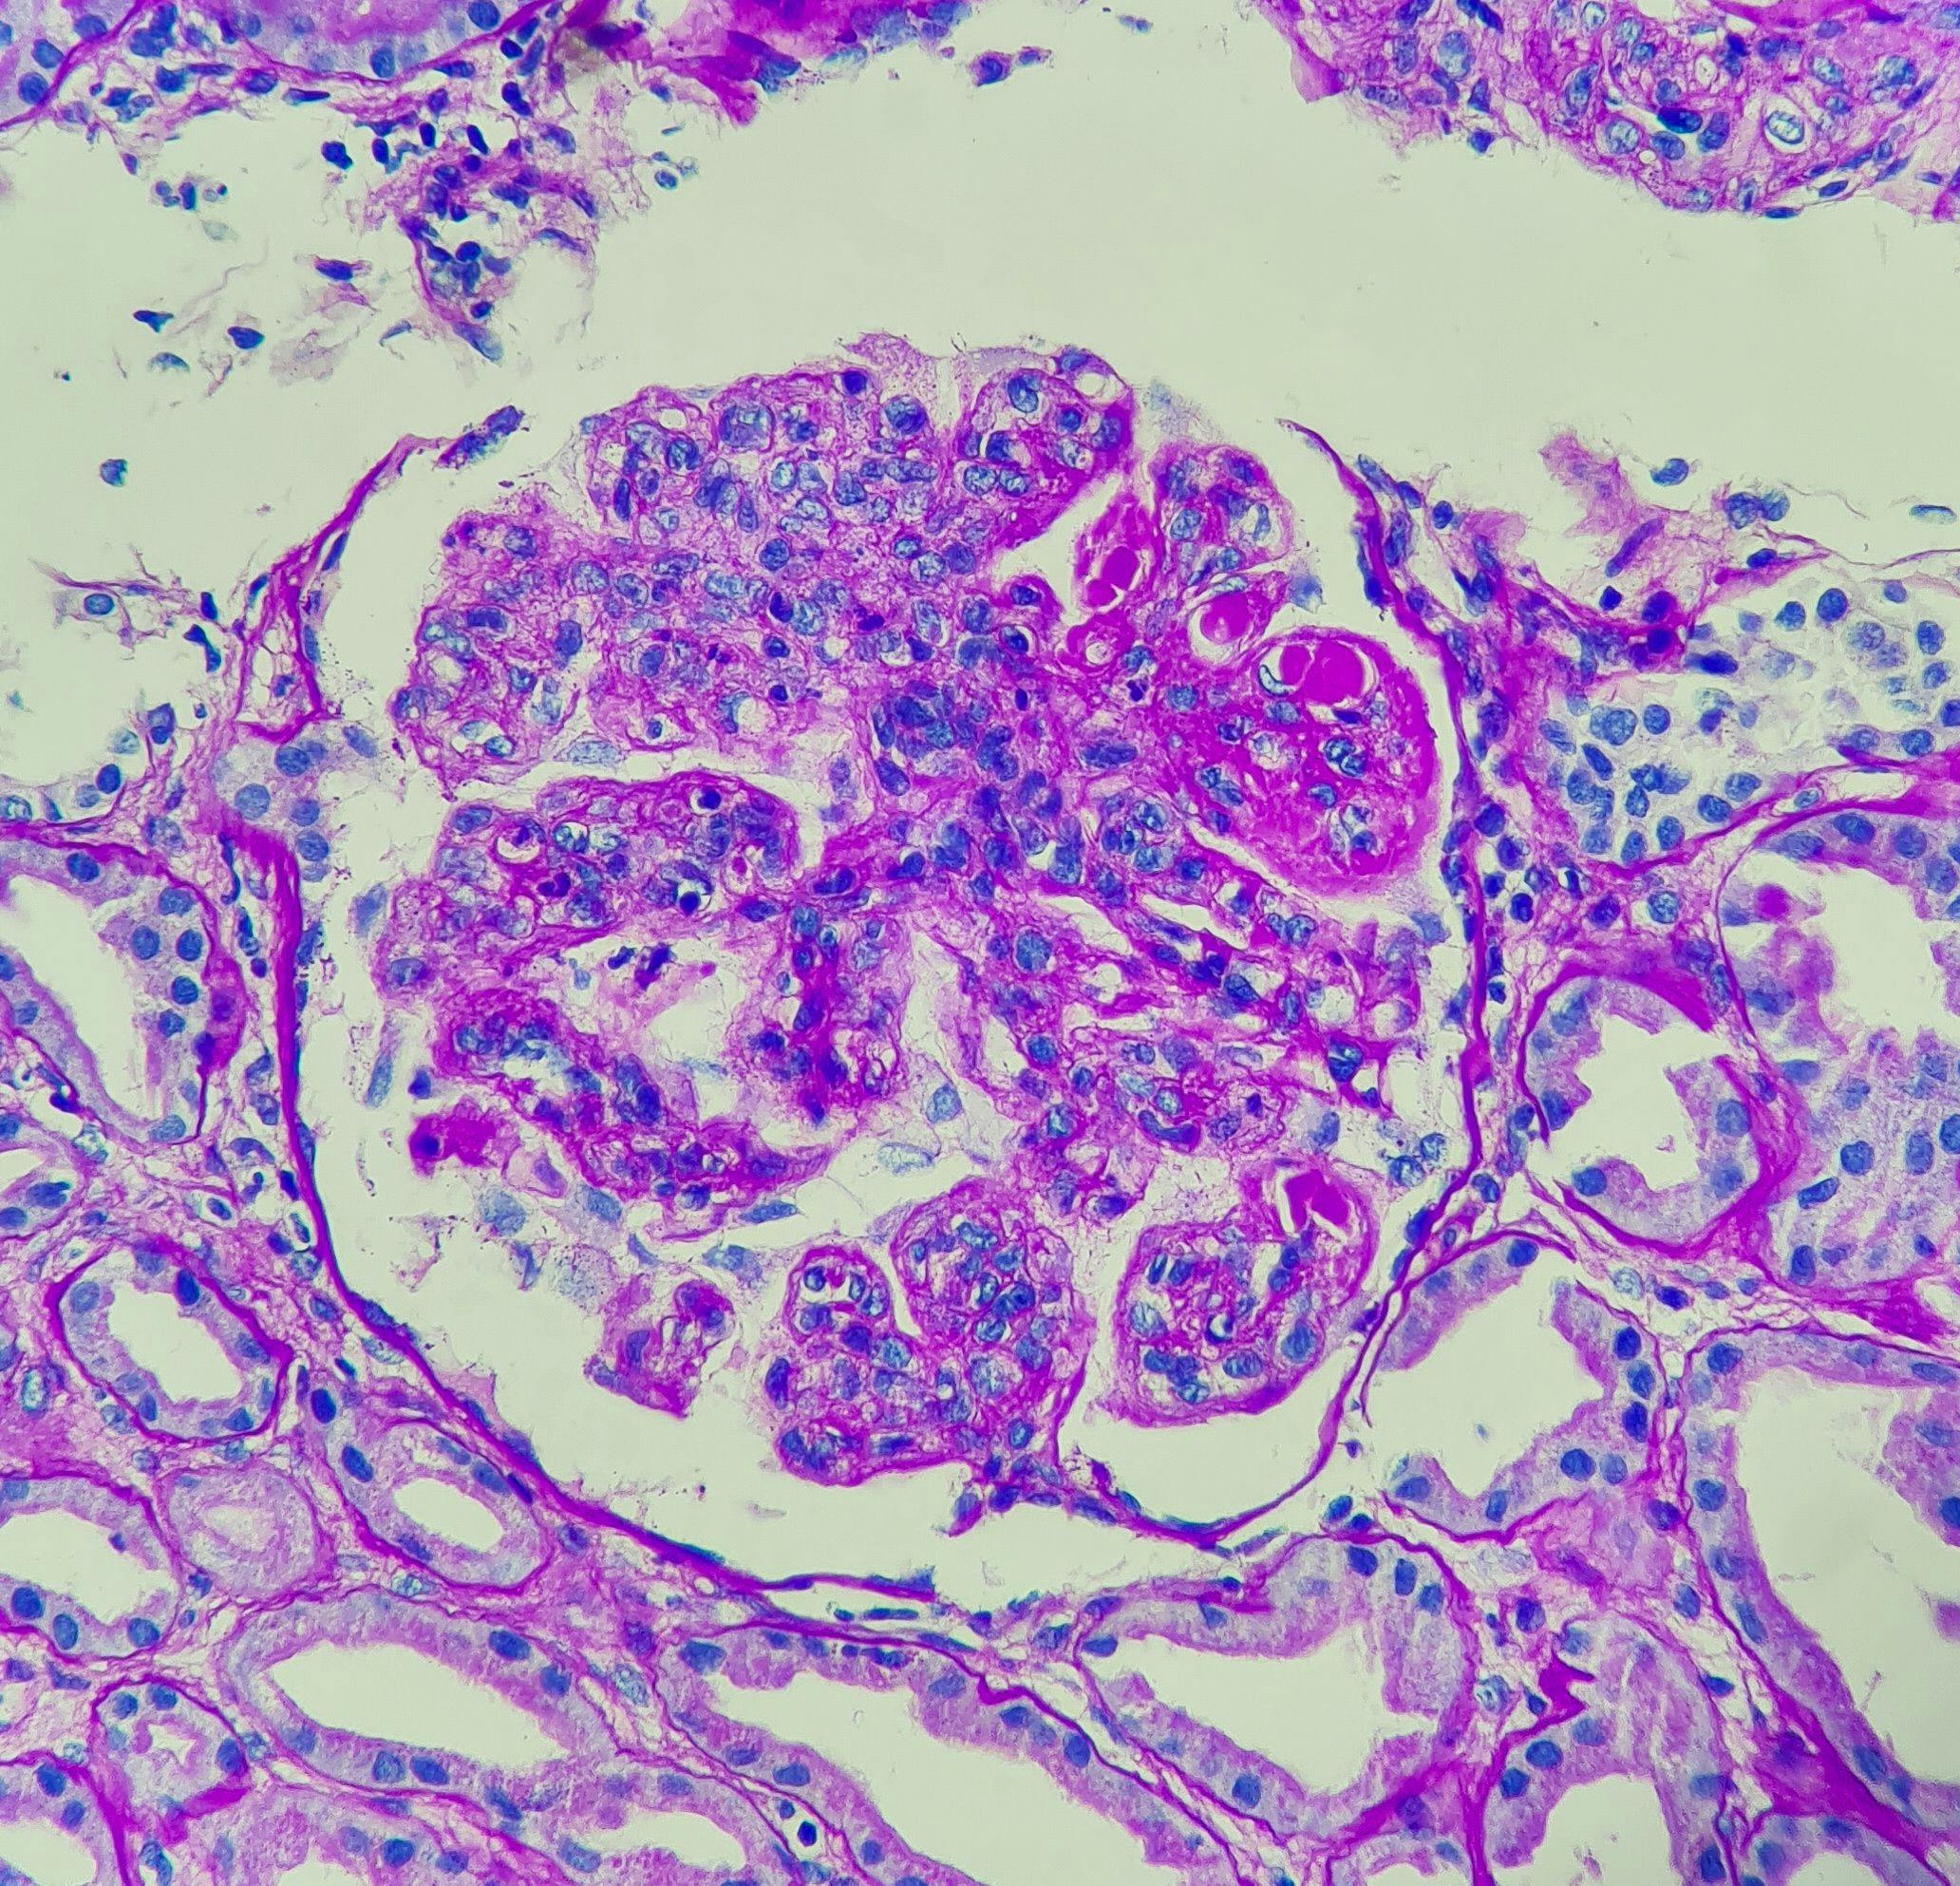 Photo of lupus nephritis, showing wire loop and hyaline thrombi, PAS stain, magnification 400x, photo under microscope - Image credit: Chutima | stock.adobe.com